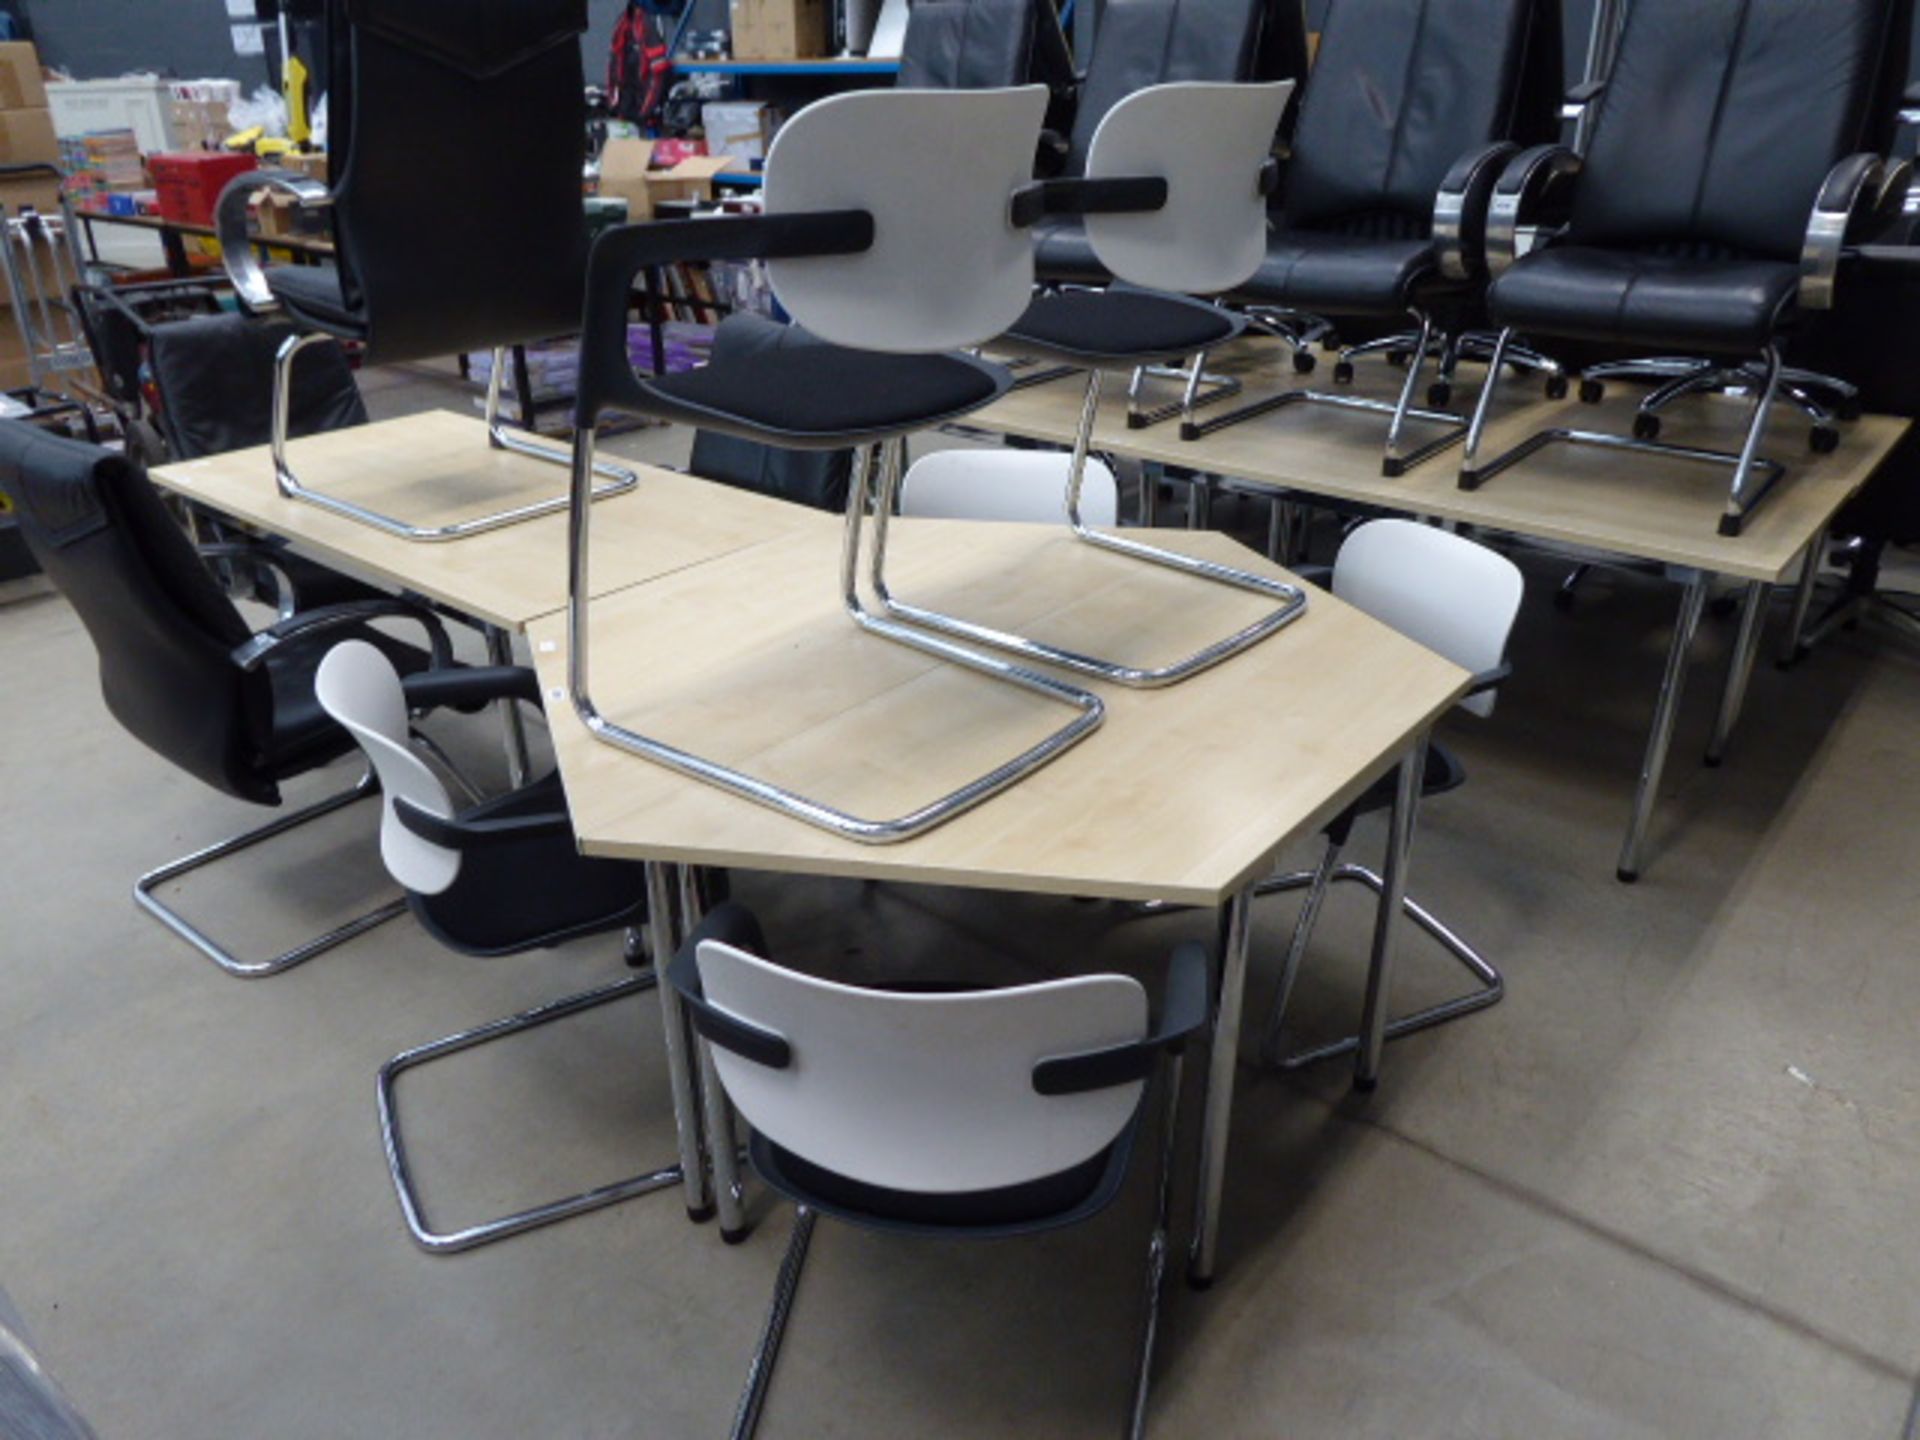 Hexagonal 2-piece maple chrome-legged table, complete with 6x white & black slide-framed chairs